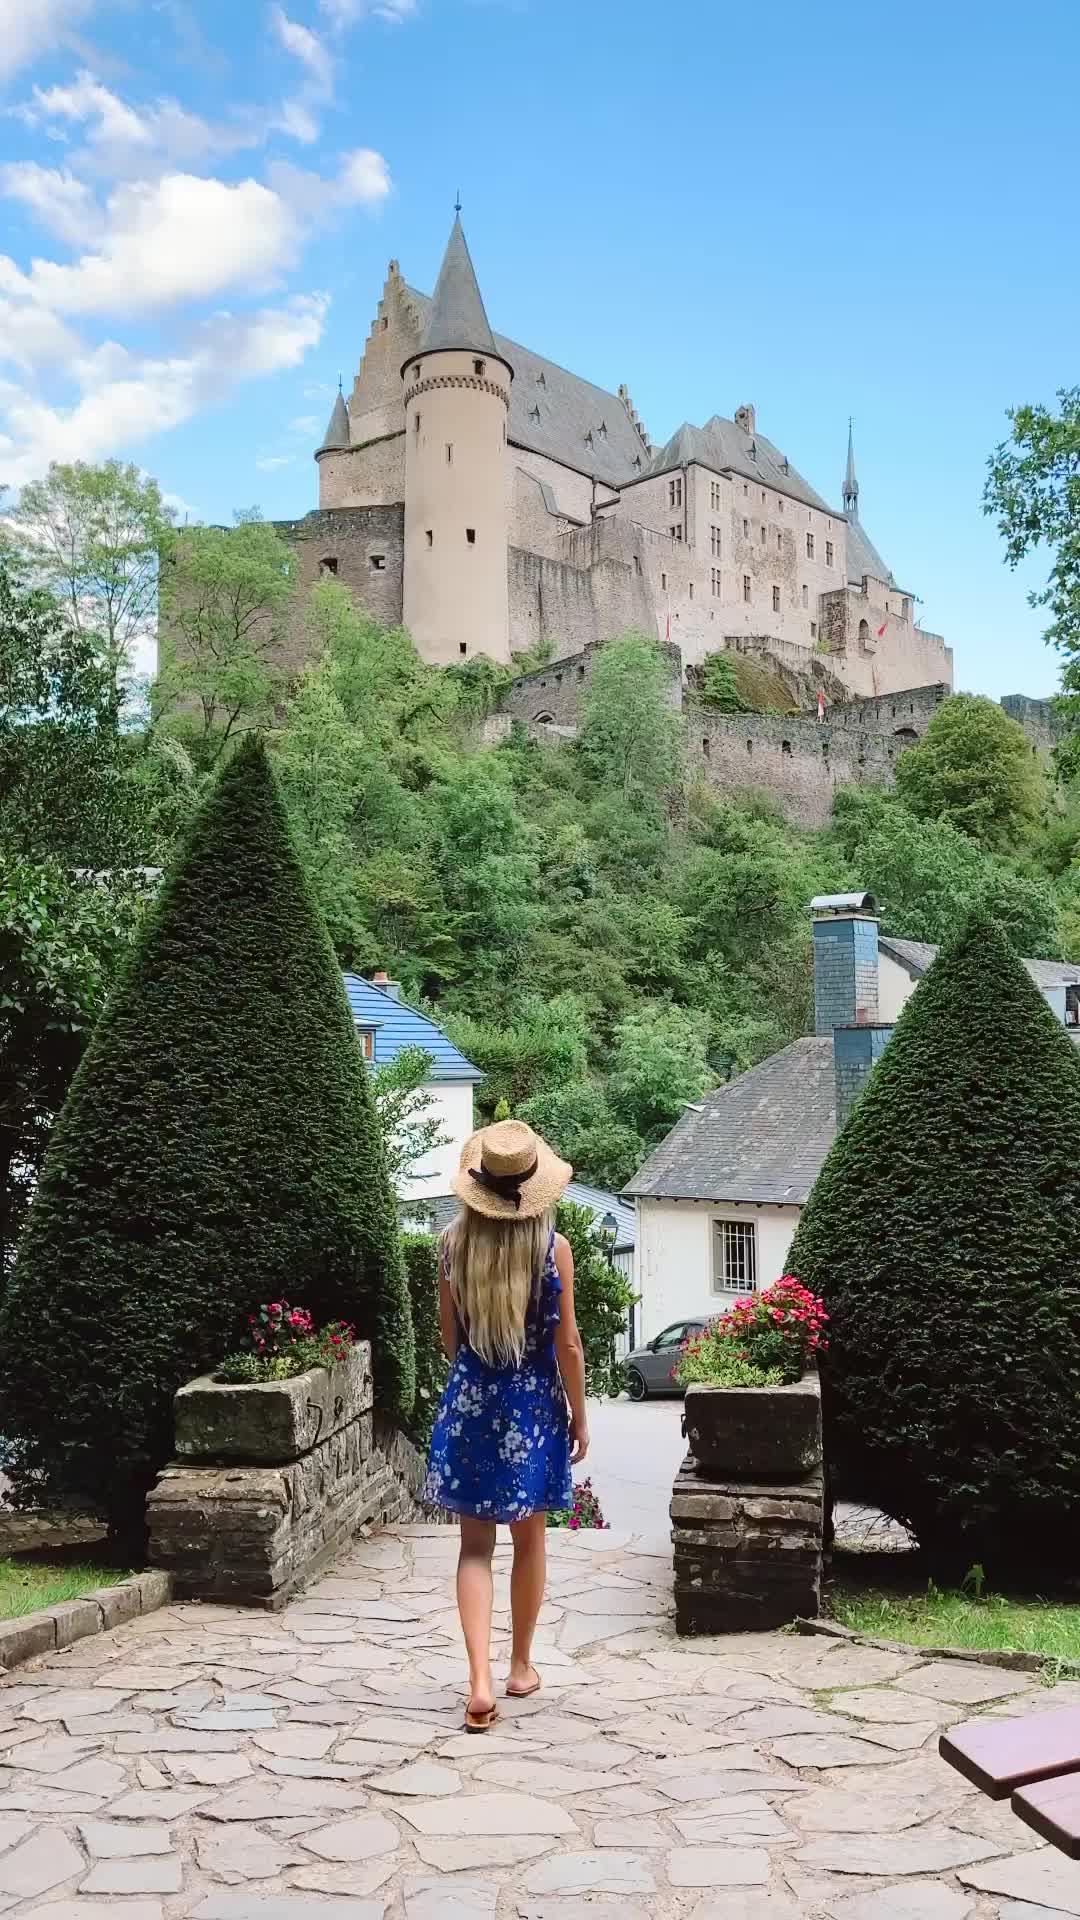 Making every summer moment count in Luxembourg 🌼🍃
⠀
Are you ready for the fall season’s cozy vibes?🍂🍁
⠀ 
⠀ ⠀
📍Captured locations:
Vianden Castle
Vianden town
Chemin de la Corniche, Luxembourg City
Pont Adolphe, Luxembourg City
Koeppchen, Wormeldange
⠀
⠀
#bestcitiesofeurope #seemycity #hello_worldpics #map_of_europe #postcardplaces #theprettycities #beautifuldestinations #luxembourg #luxembourgcity